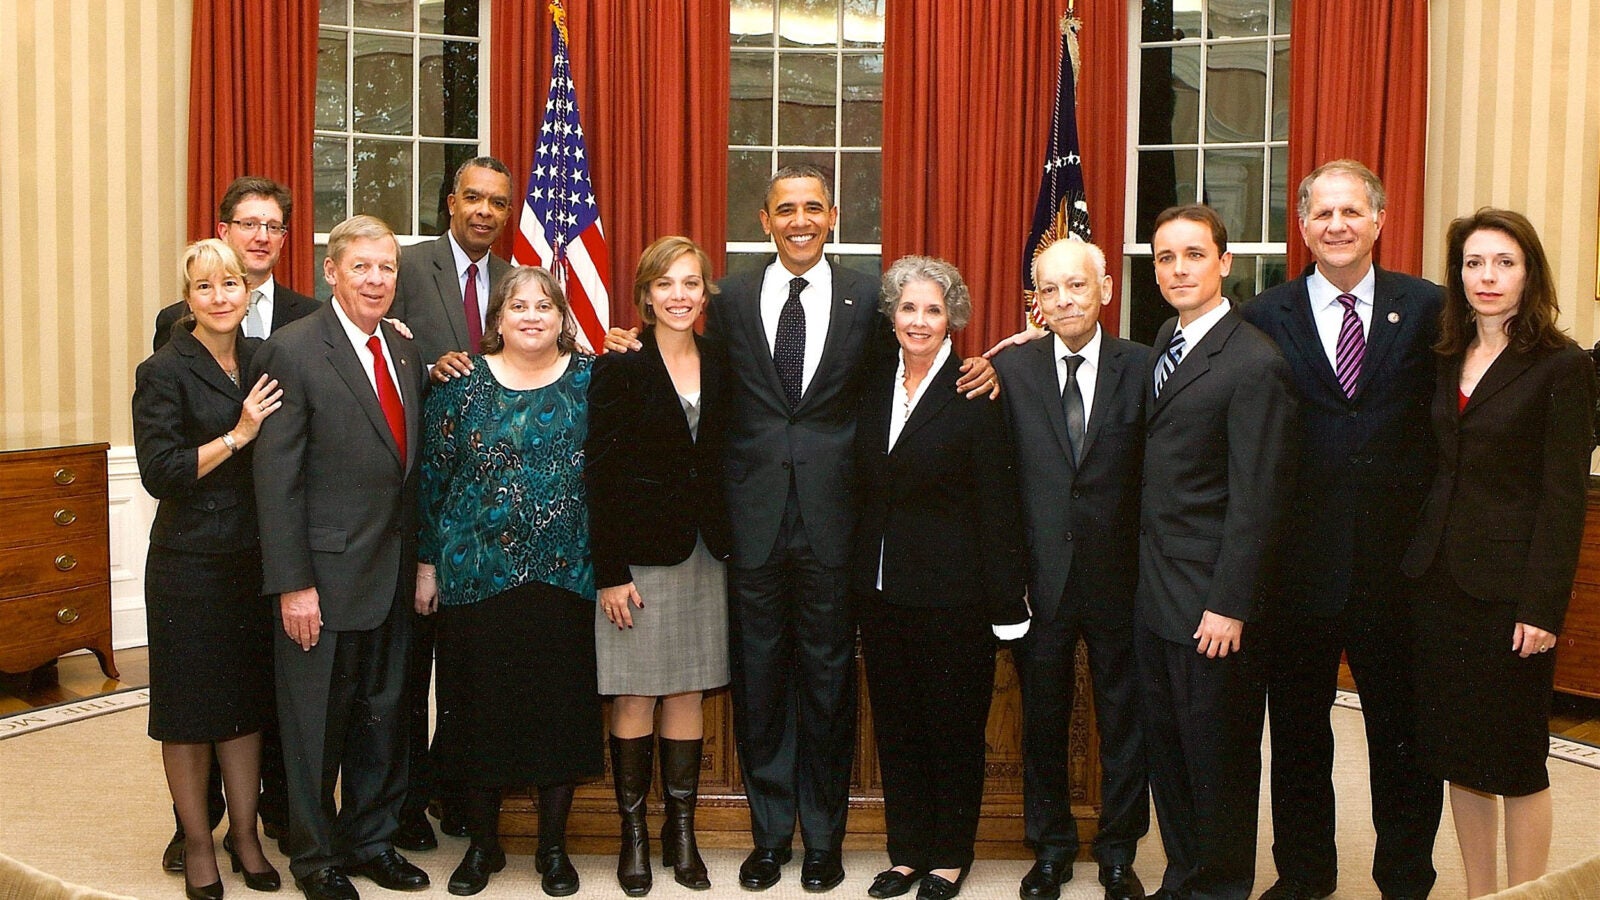 Karestan Koenen in the White House with President Obama and others after passage of Kate Puzey Peace Corps Volunteer Protection Act.